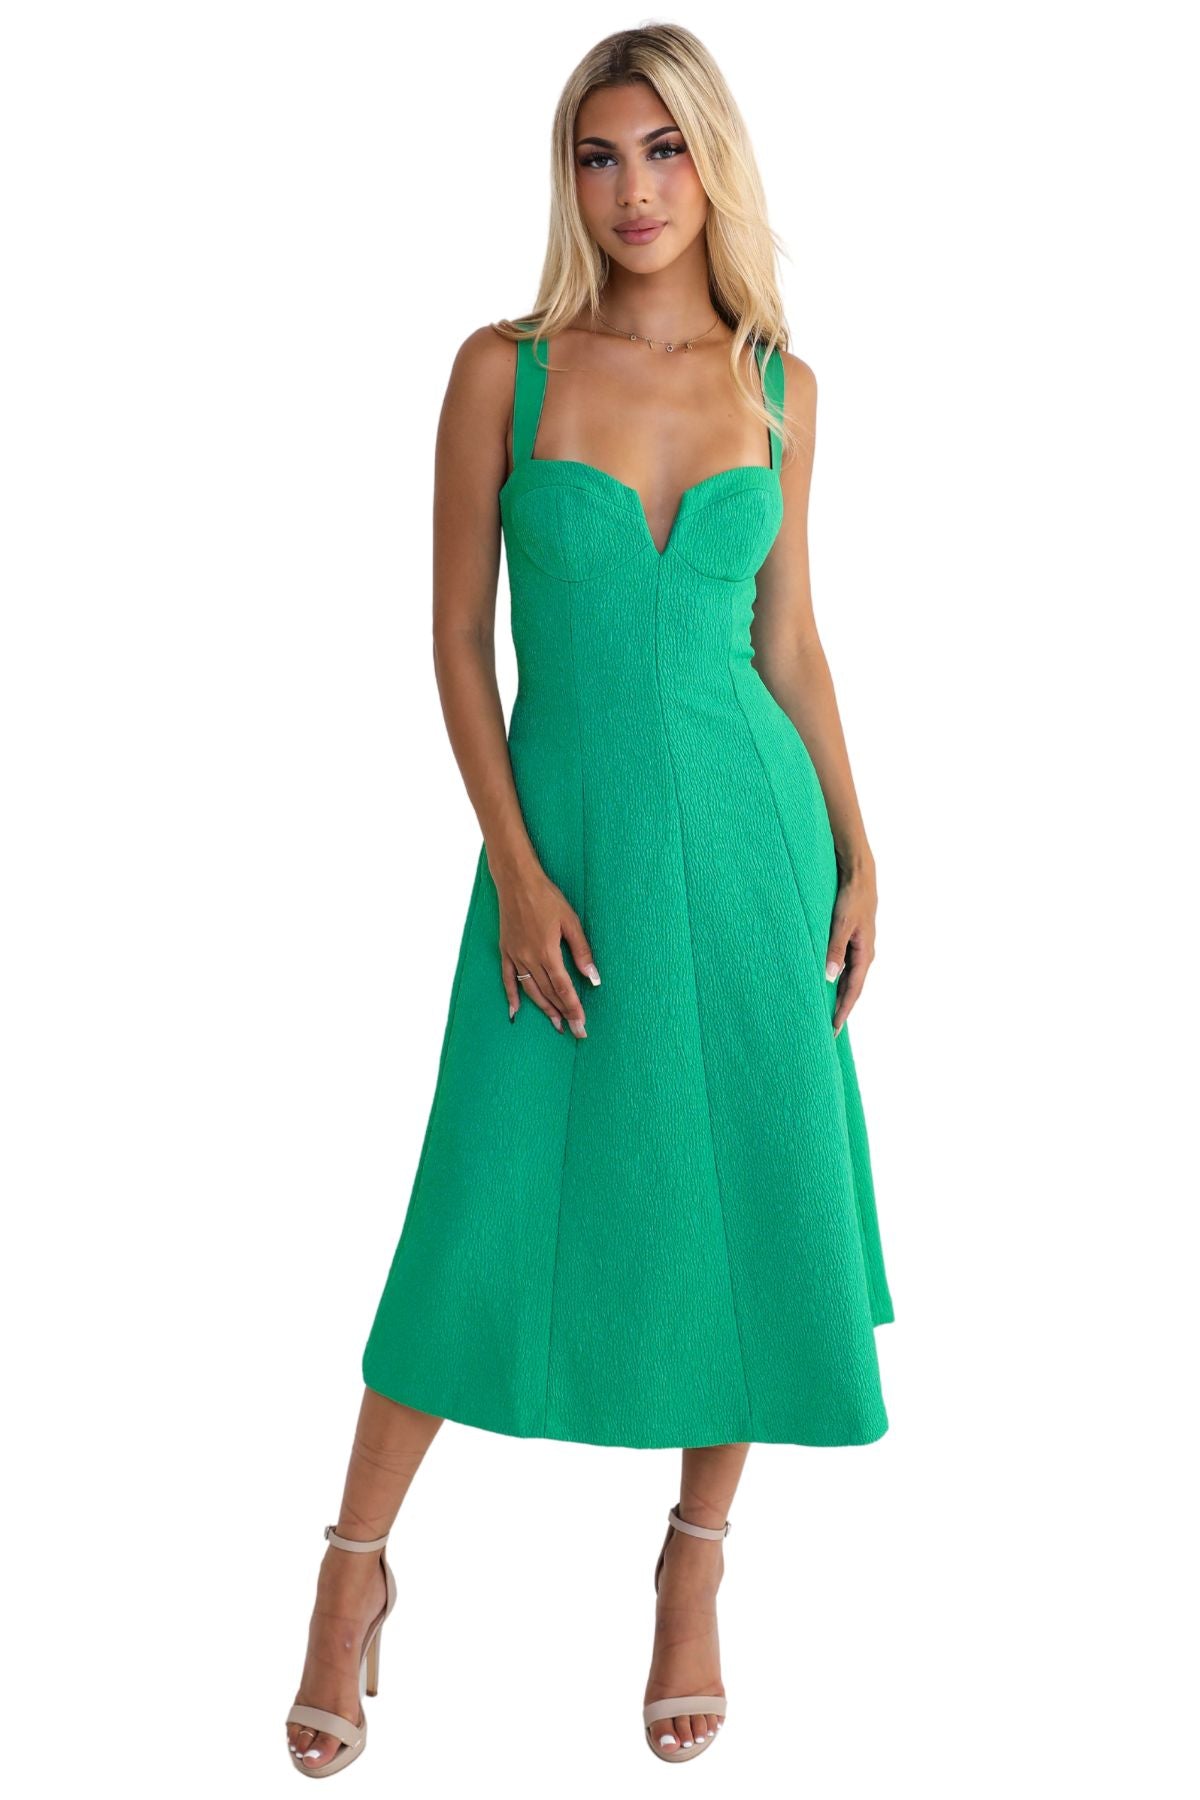 How to Choose the Perfect Accessories for Your Green Dress   stylishwomenoutfitscom